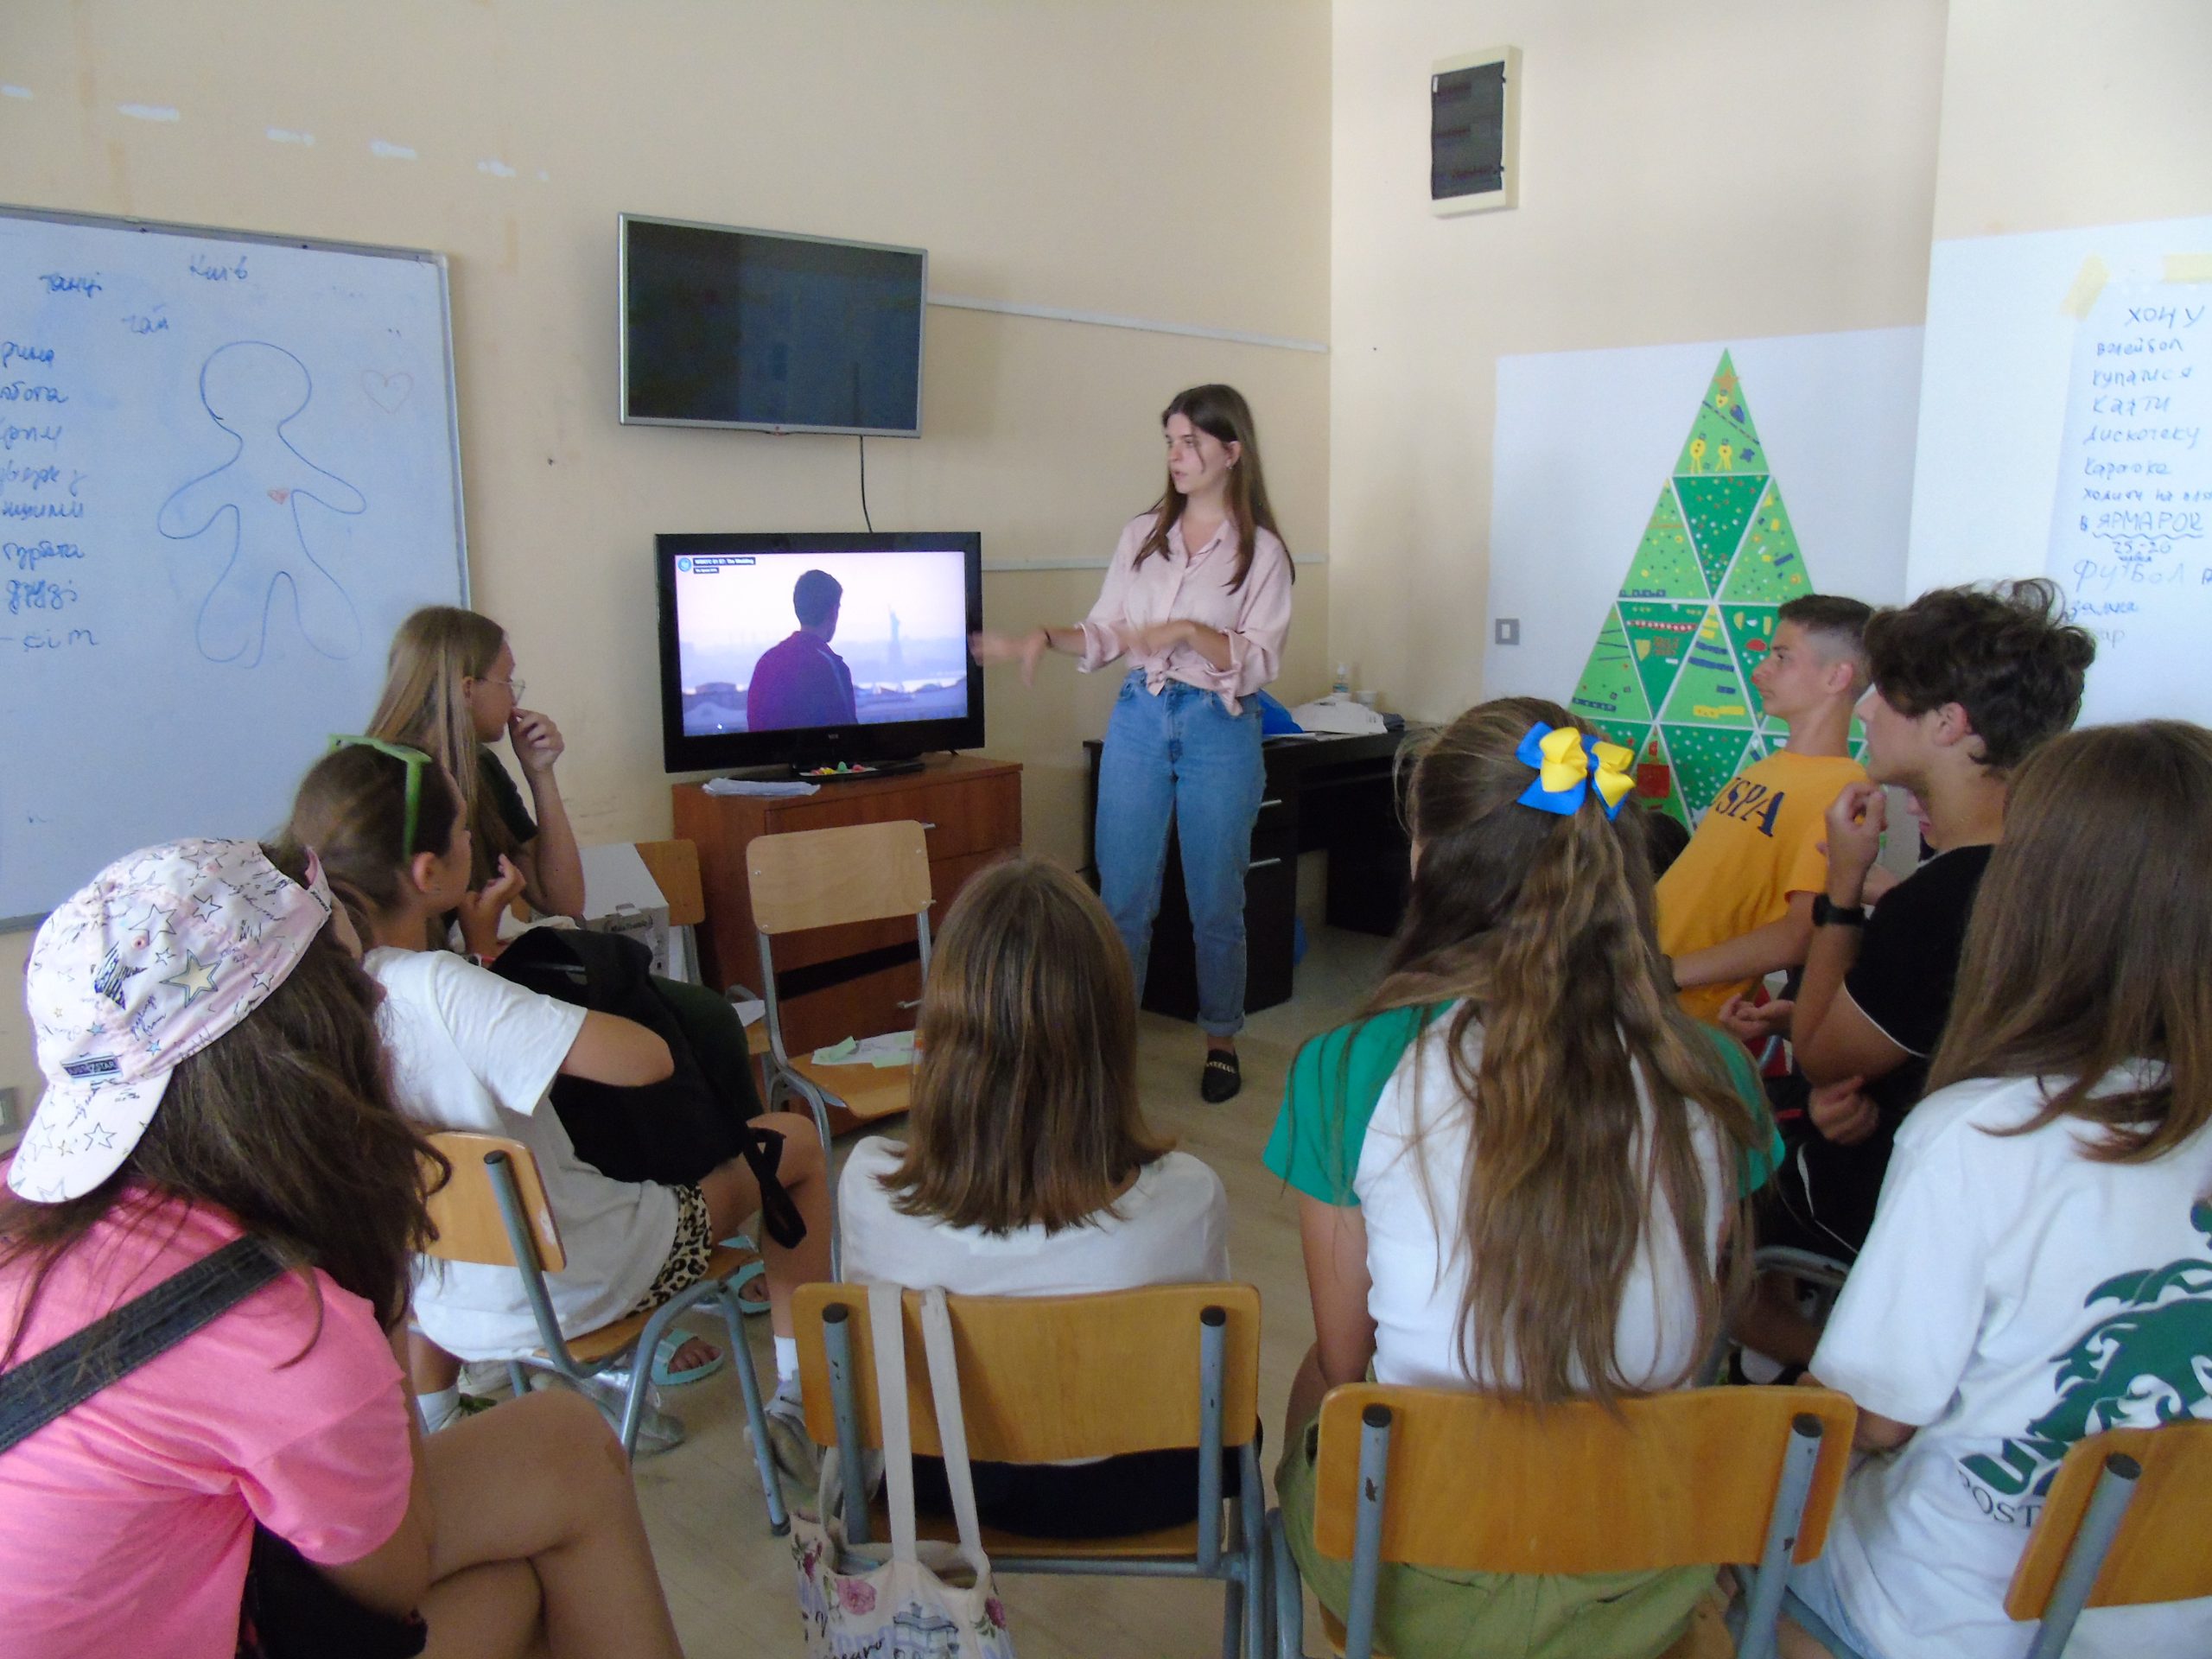 Elena Sapelyuk (SFS’23) teaches creative writing to a group of students facing her in a classroom during a summer camp in Montenegro.